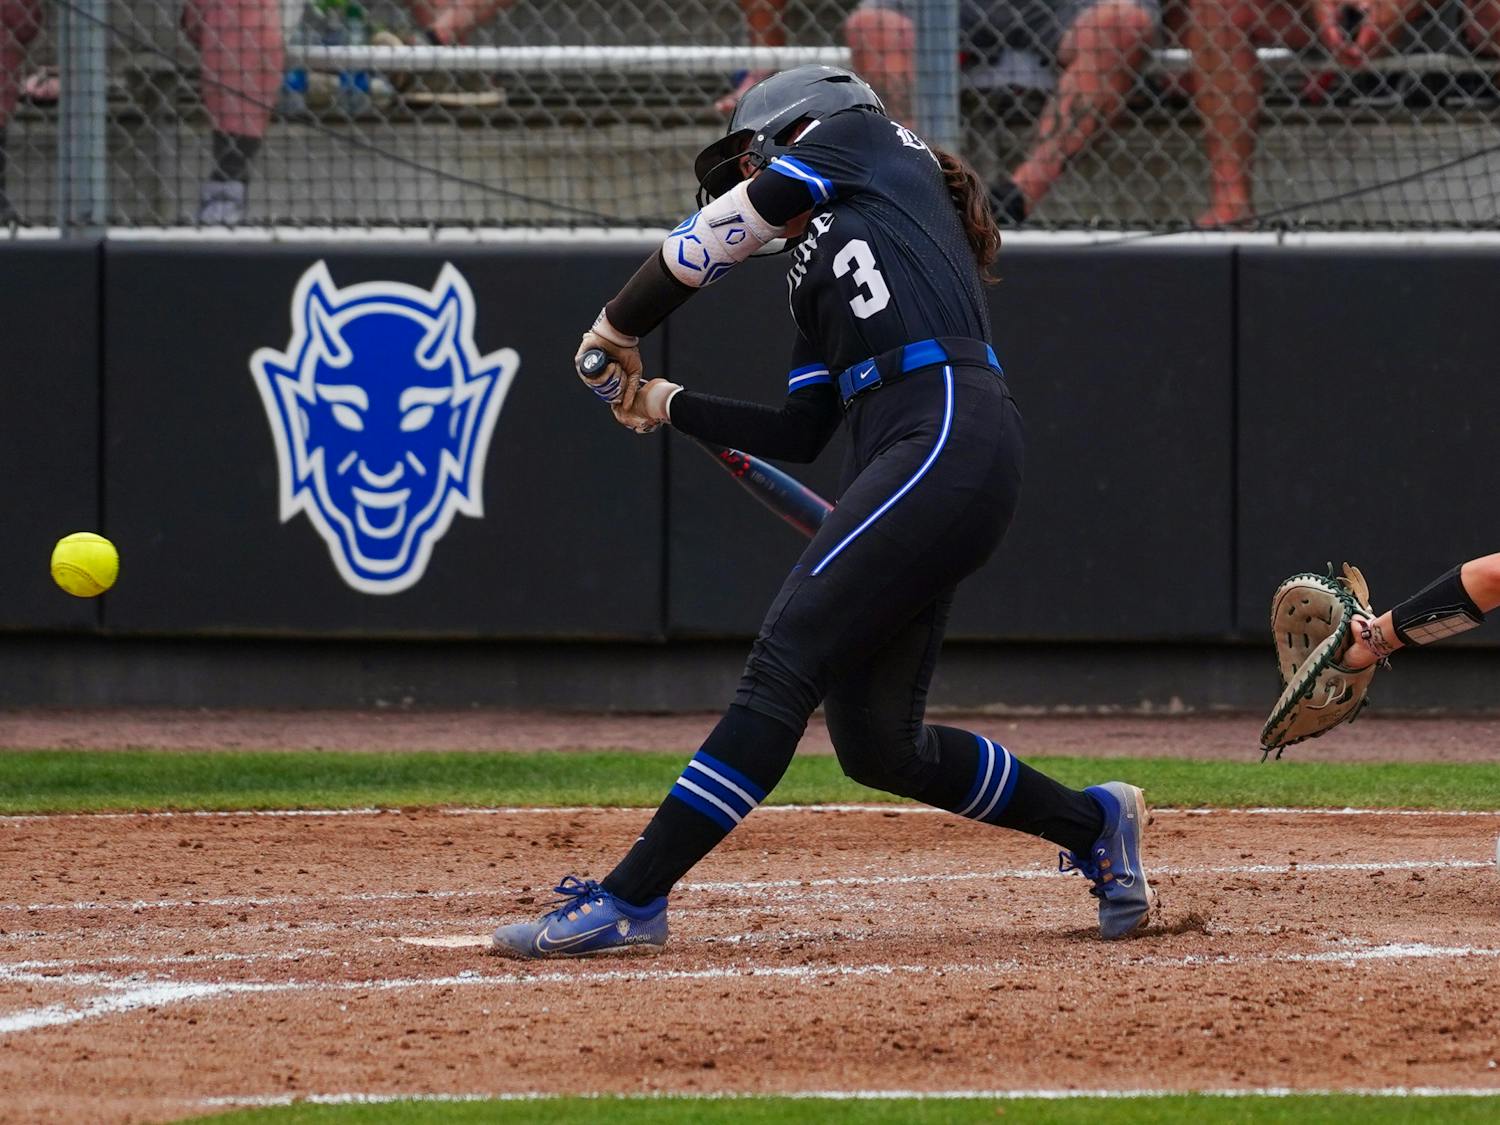 Junior catcher Kelly Torres earned the only home run of the game in Duke's win against Charlotte.